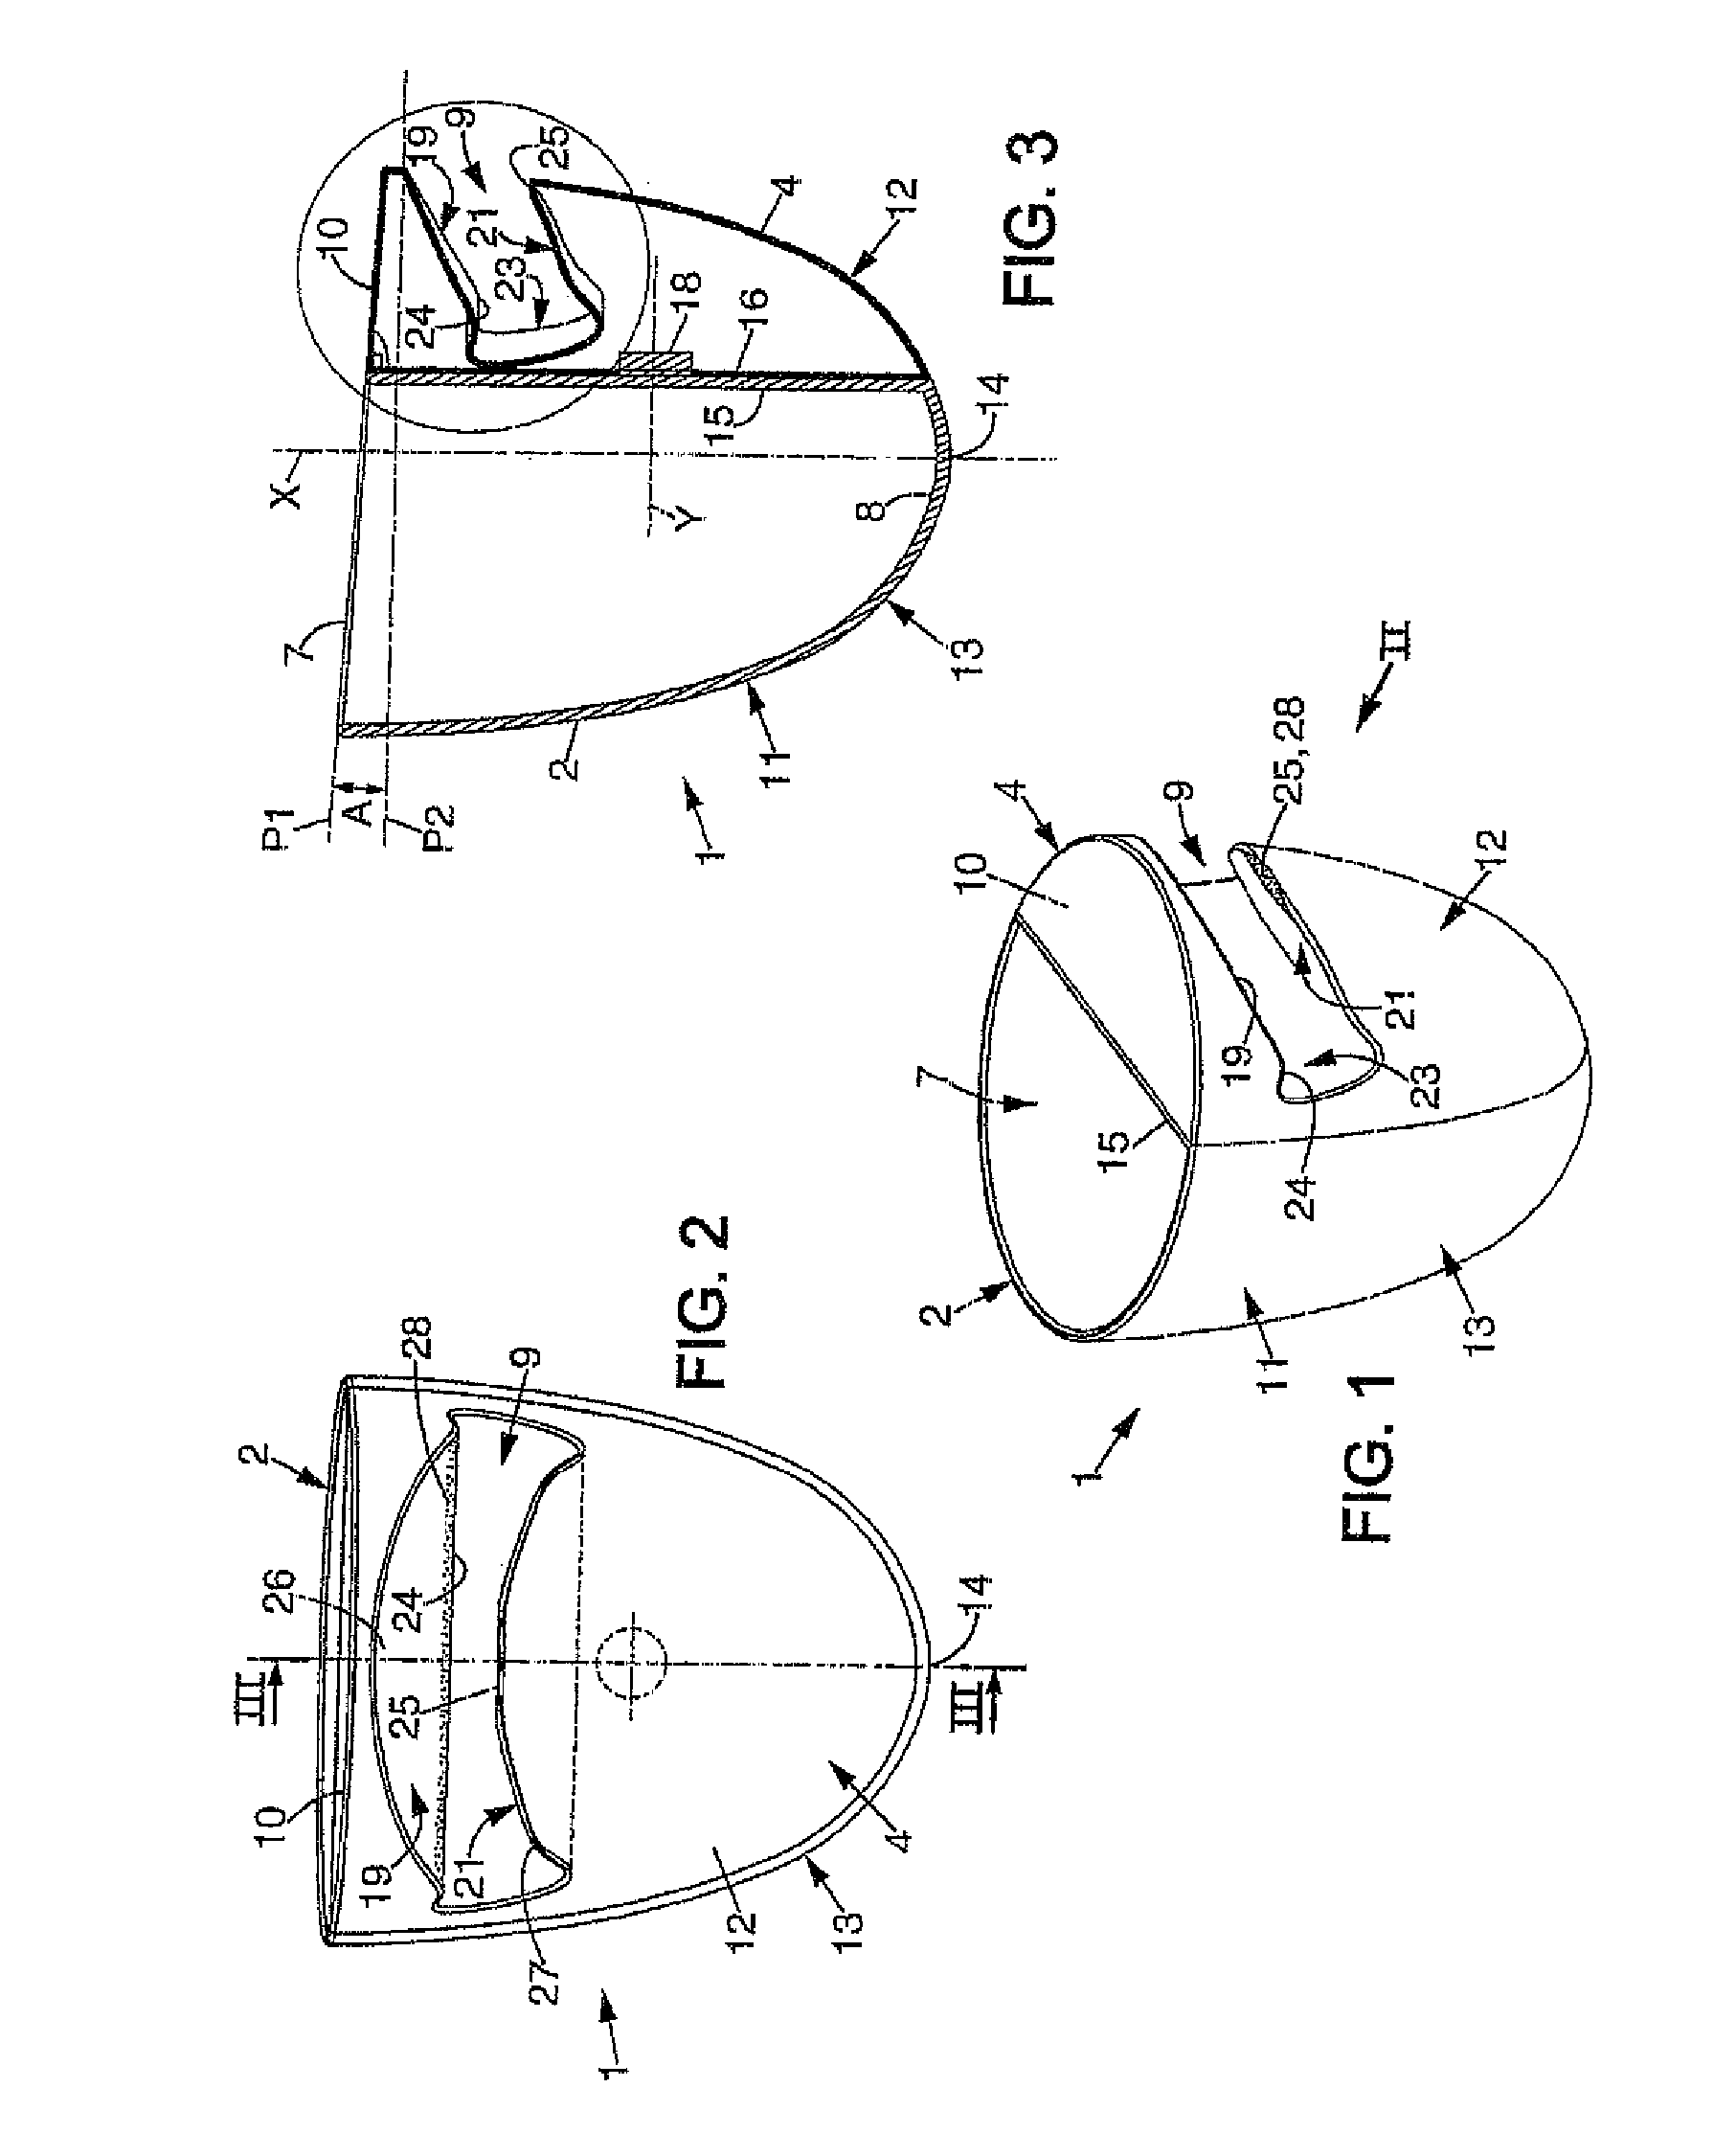 Device Comprising a Container for Bottles